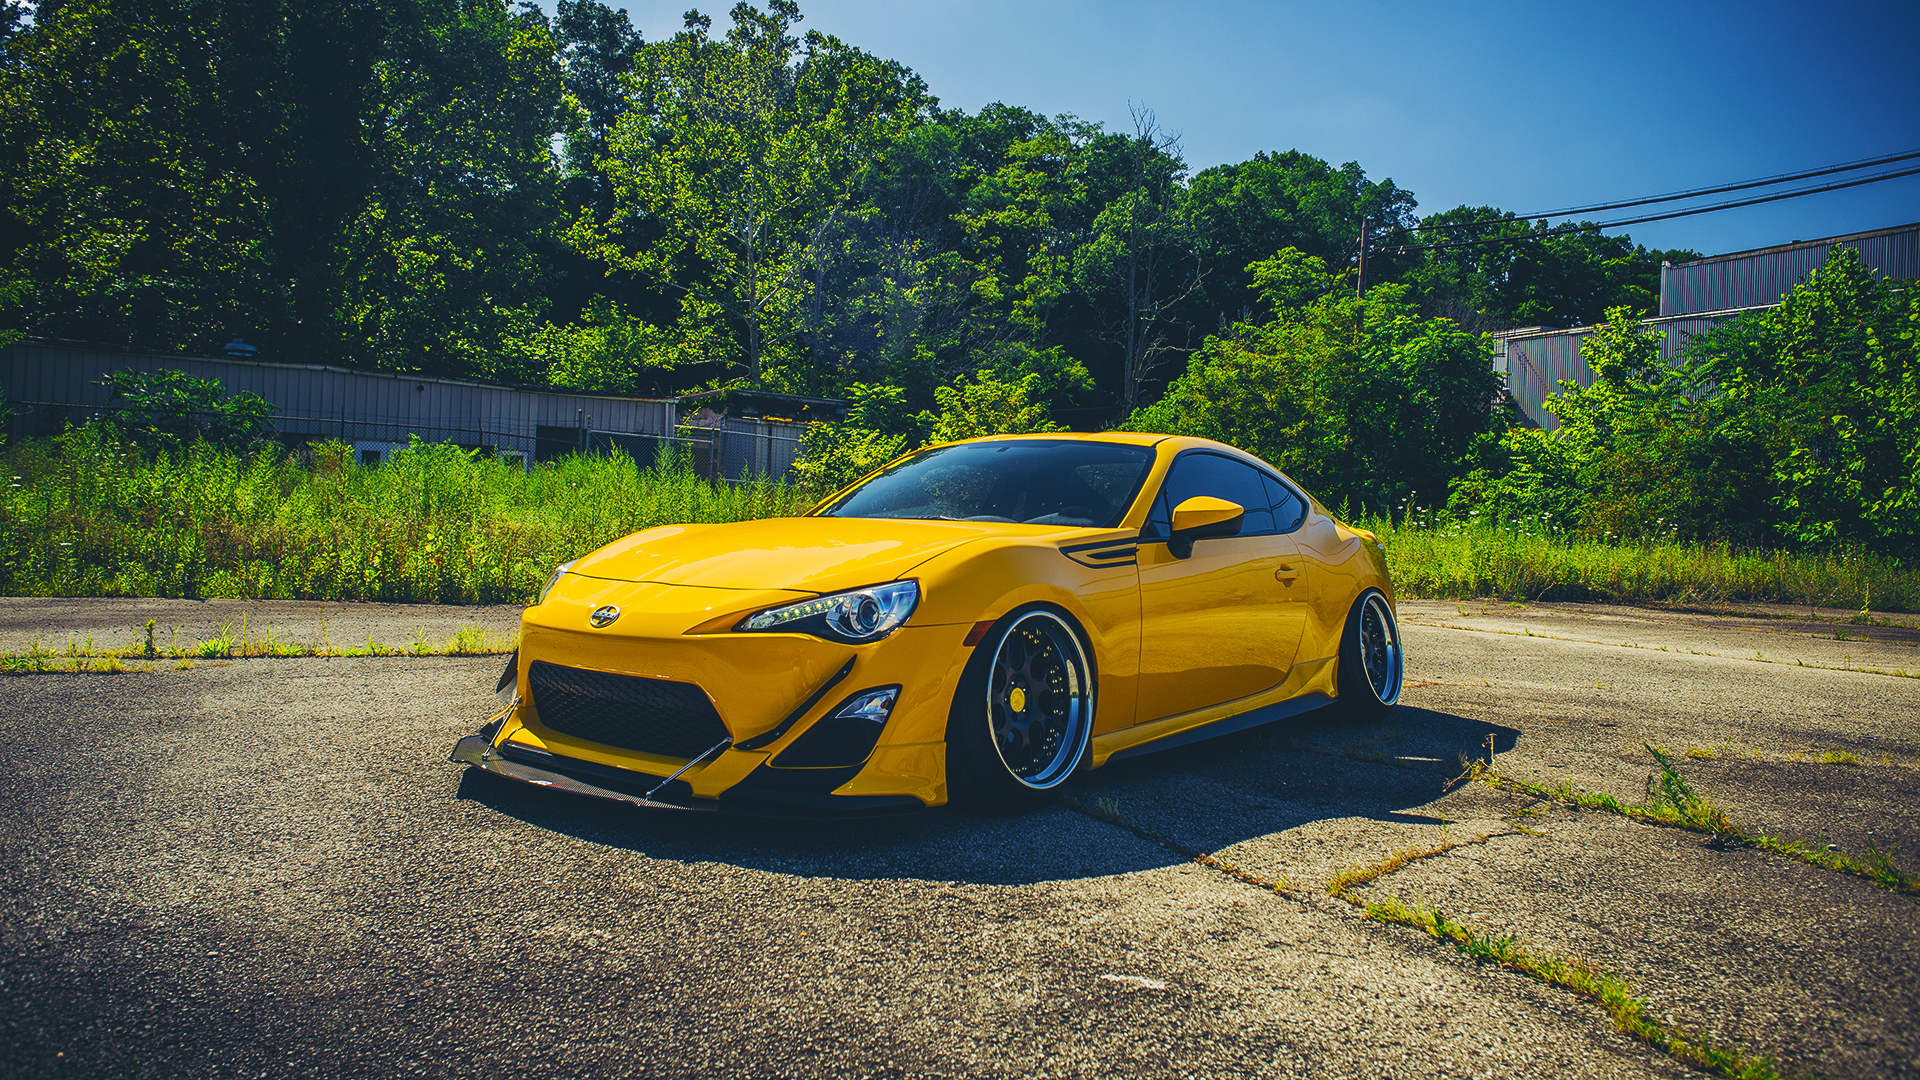 Scion FRS Stance Wallpaper | HD Car Wallpapers | ID #5667